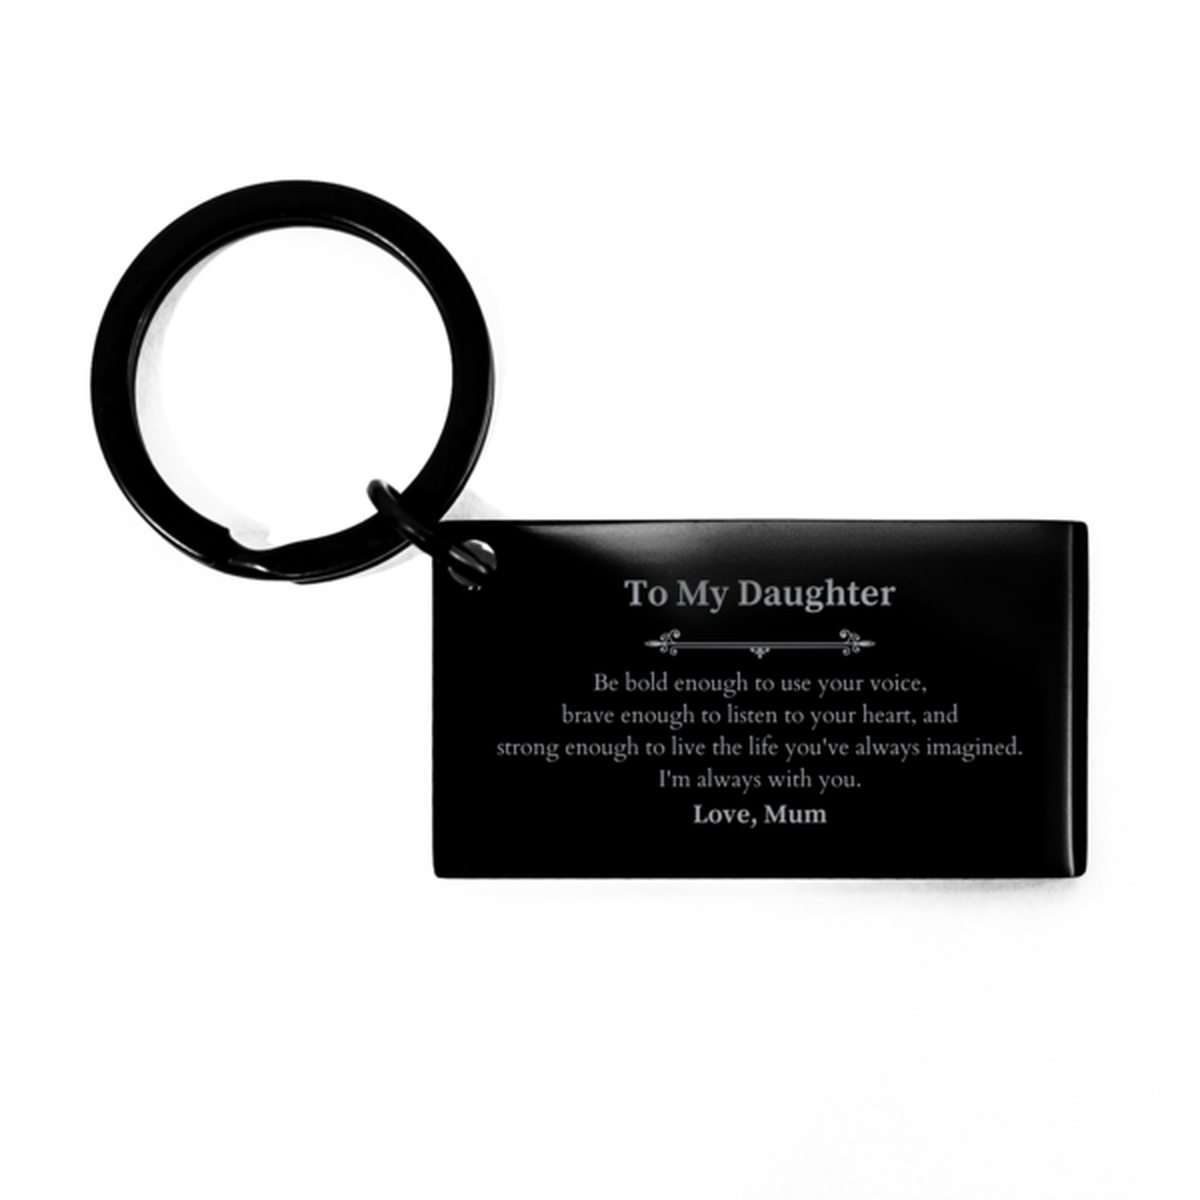 Keepsake Daughter Keychain Gift Idea Graduation Christmas Birthday Daughter from Mum, Daughter Be bold enough to use your voice, brave enough to listen to your heart. Love, Mum